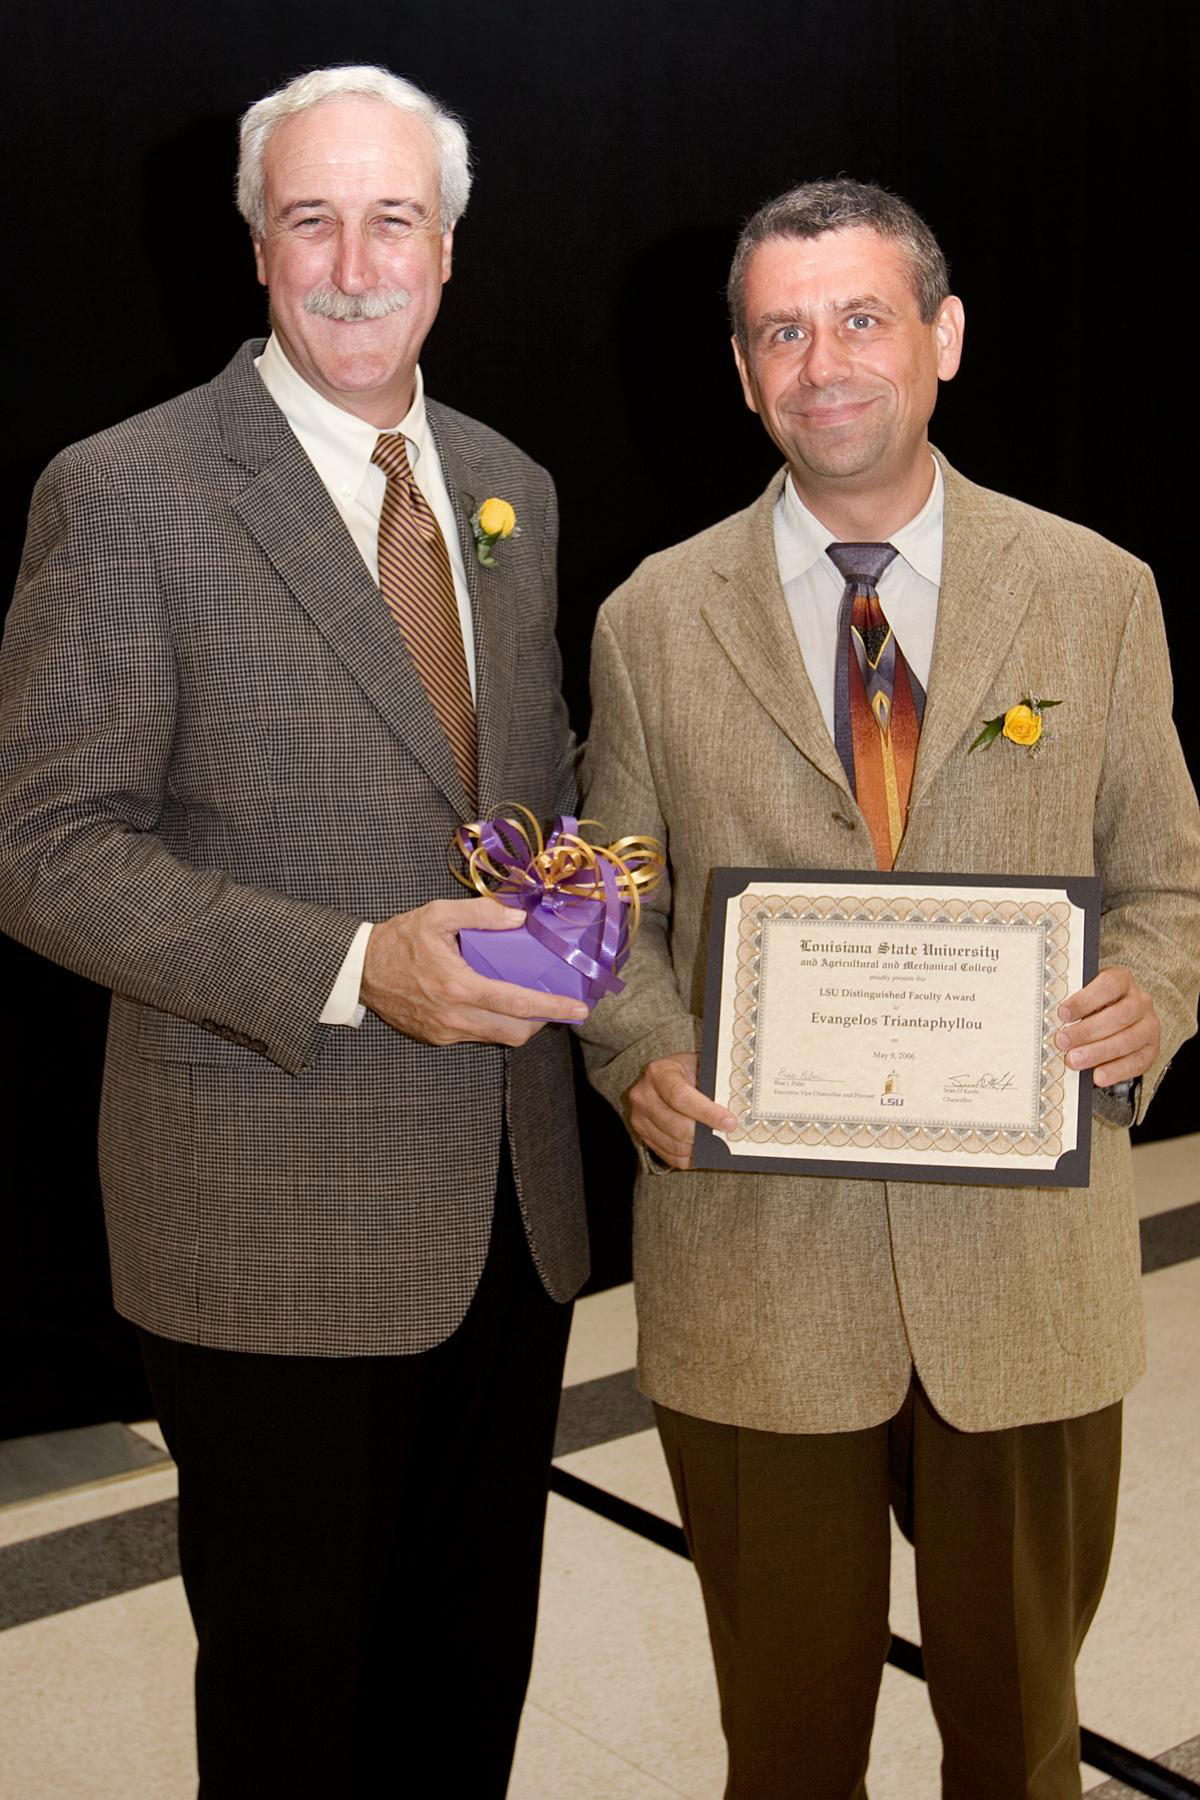 Dr. Evangelos Triantaphyllou & Chancellor O'Keefe in the 2006 Awards Ceremony at LSU